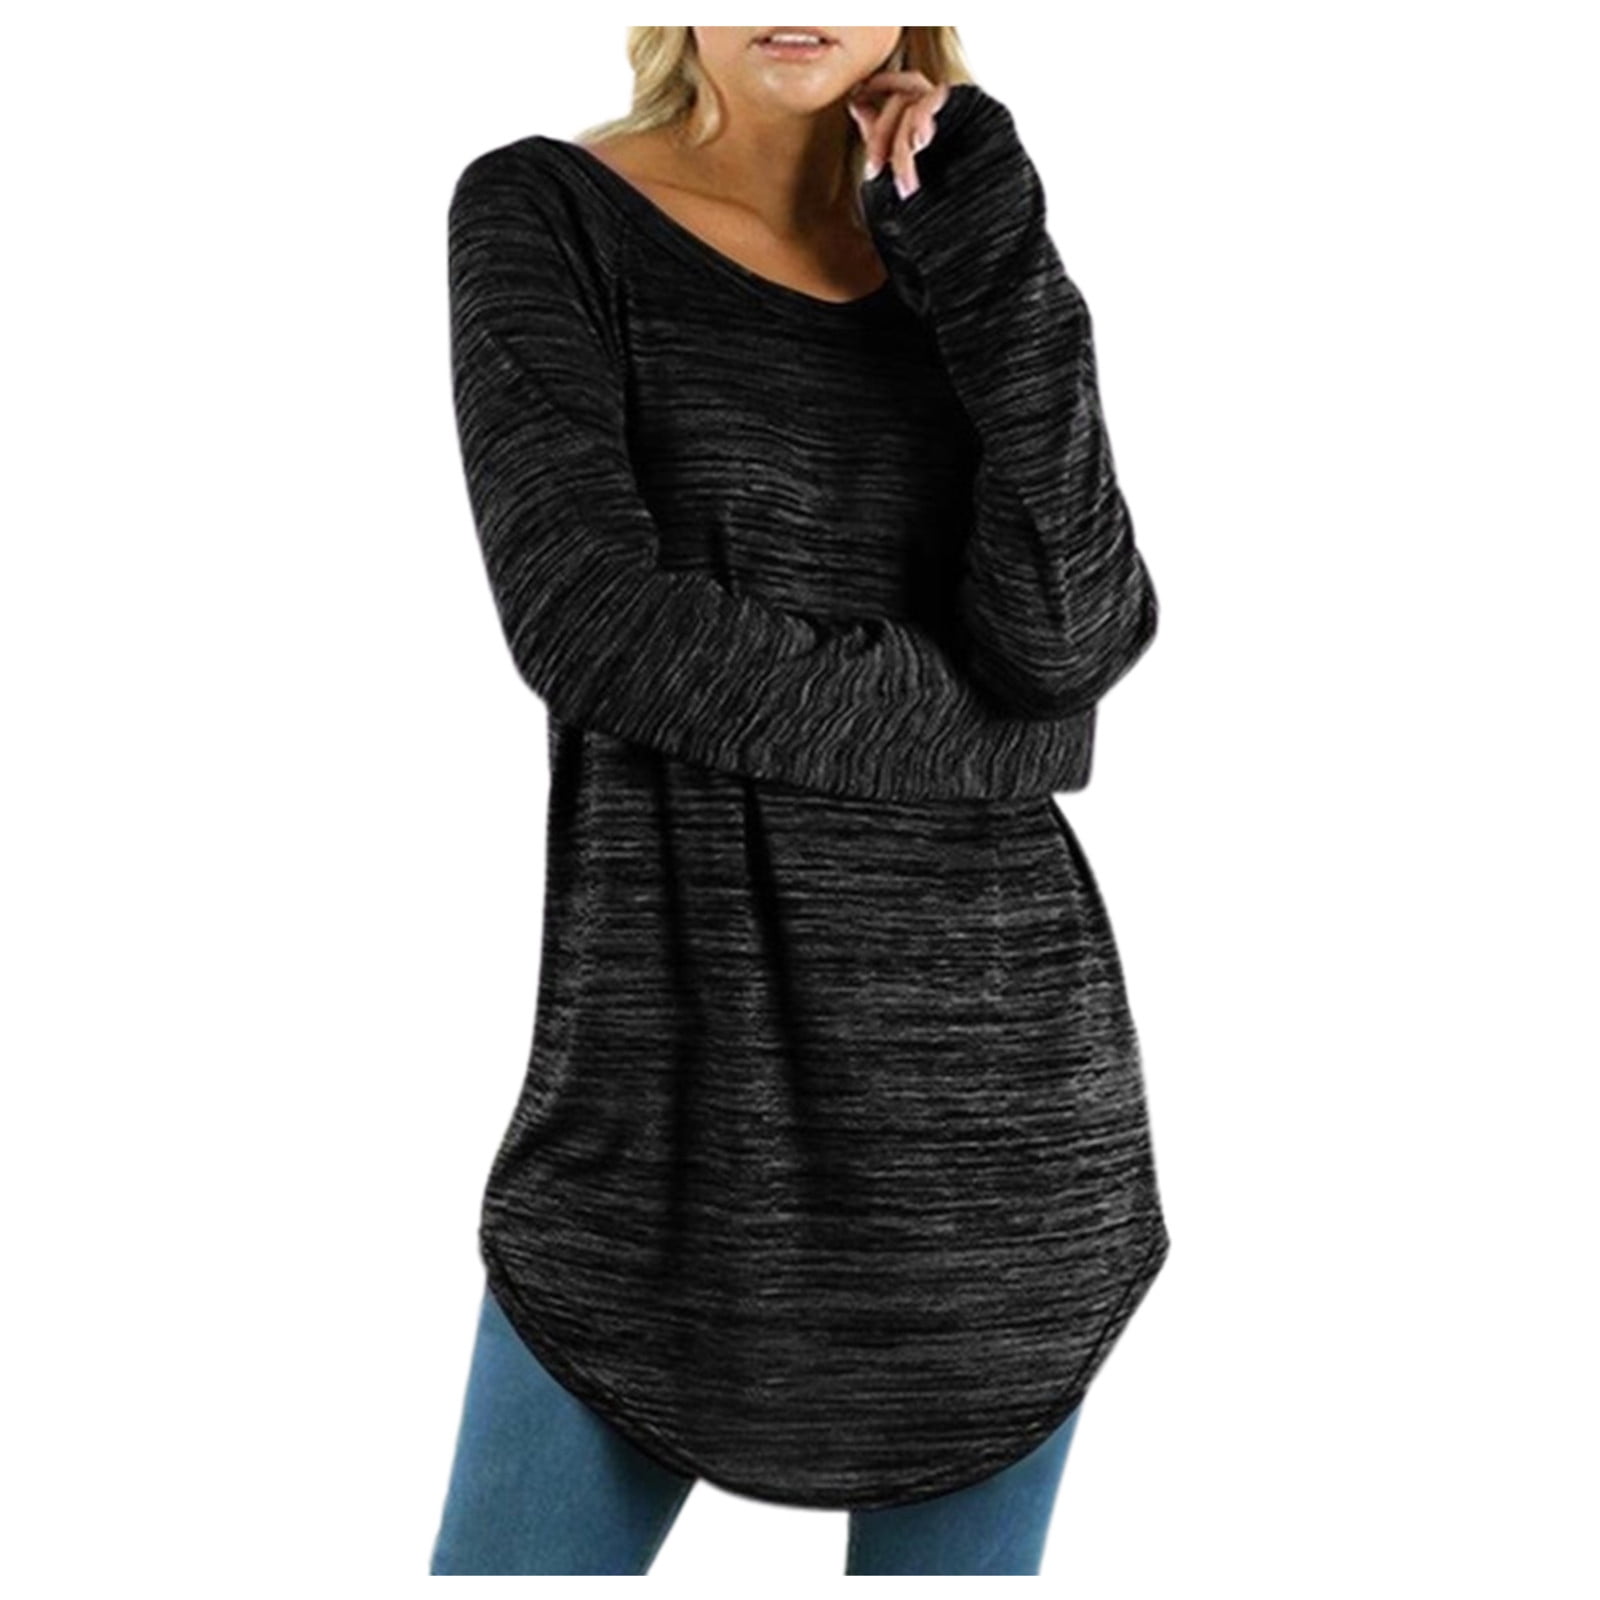 Hide Belly Long Shirt Flowy Round Neck Solid Long Sleeve Shirts Plus Size Tops for Women Dressy Comfy Tunic Tops to Wear with Leggings Black L 82b3fe9e fca9 442e 9a53 fa8c37f8b2af.89270b4bed0ef0bf217e13ec0c25b6bf